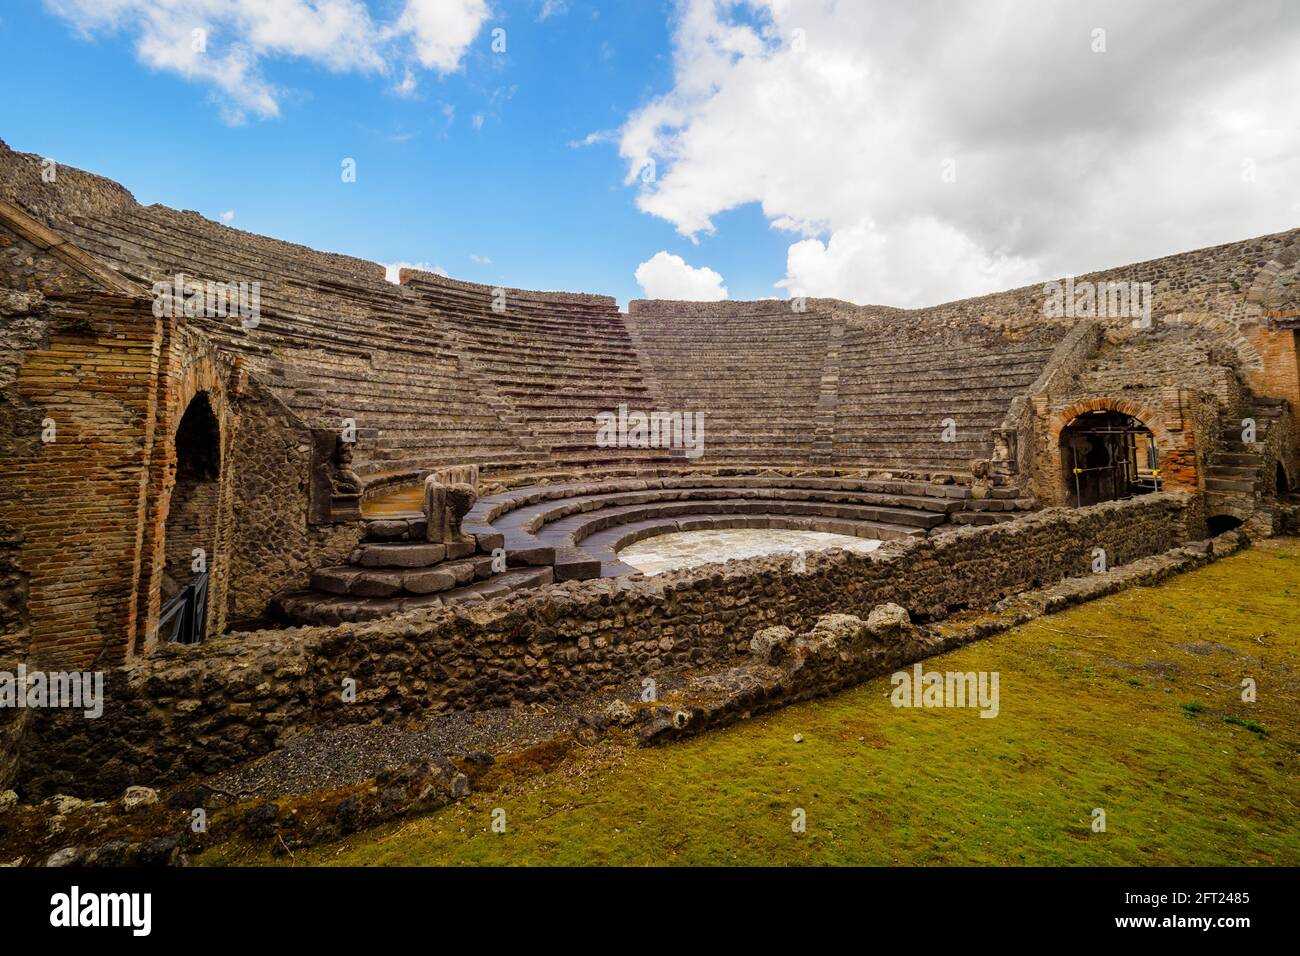 The Odeon or teatrum tectum as it was called by the Romans. This building was dedicated to the representation of the most popular theatrical genre at the time, miming, and could also be used for musical and singing performances - Pompeii archaeological site, Italy Stock Photo